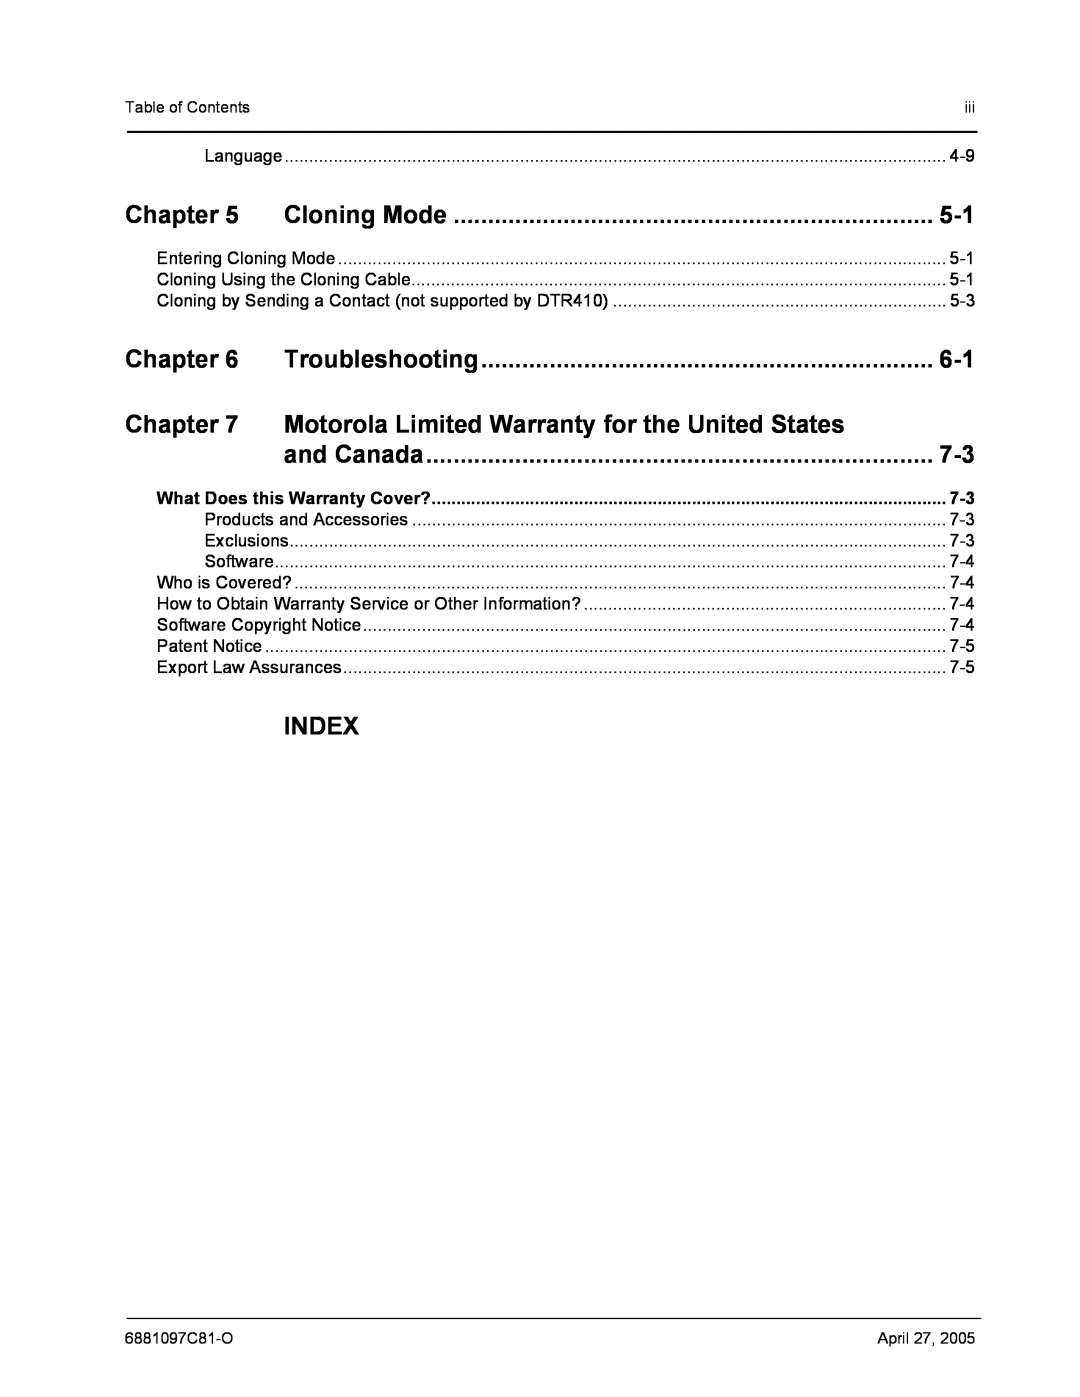 Motorola DTR510 Cloning Mode, Troubleshooting, Motorola Limited Warranty for the United States, and Canada, Index, Chapter 